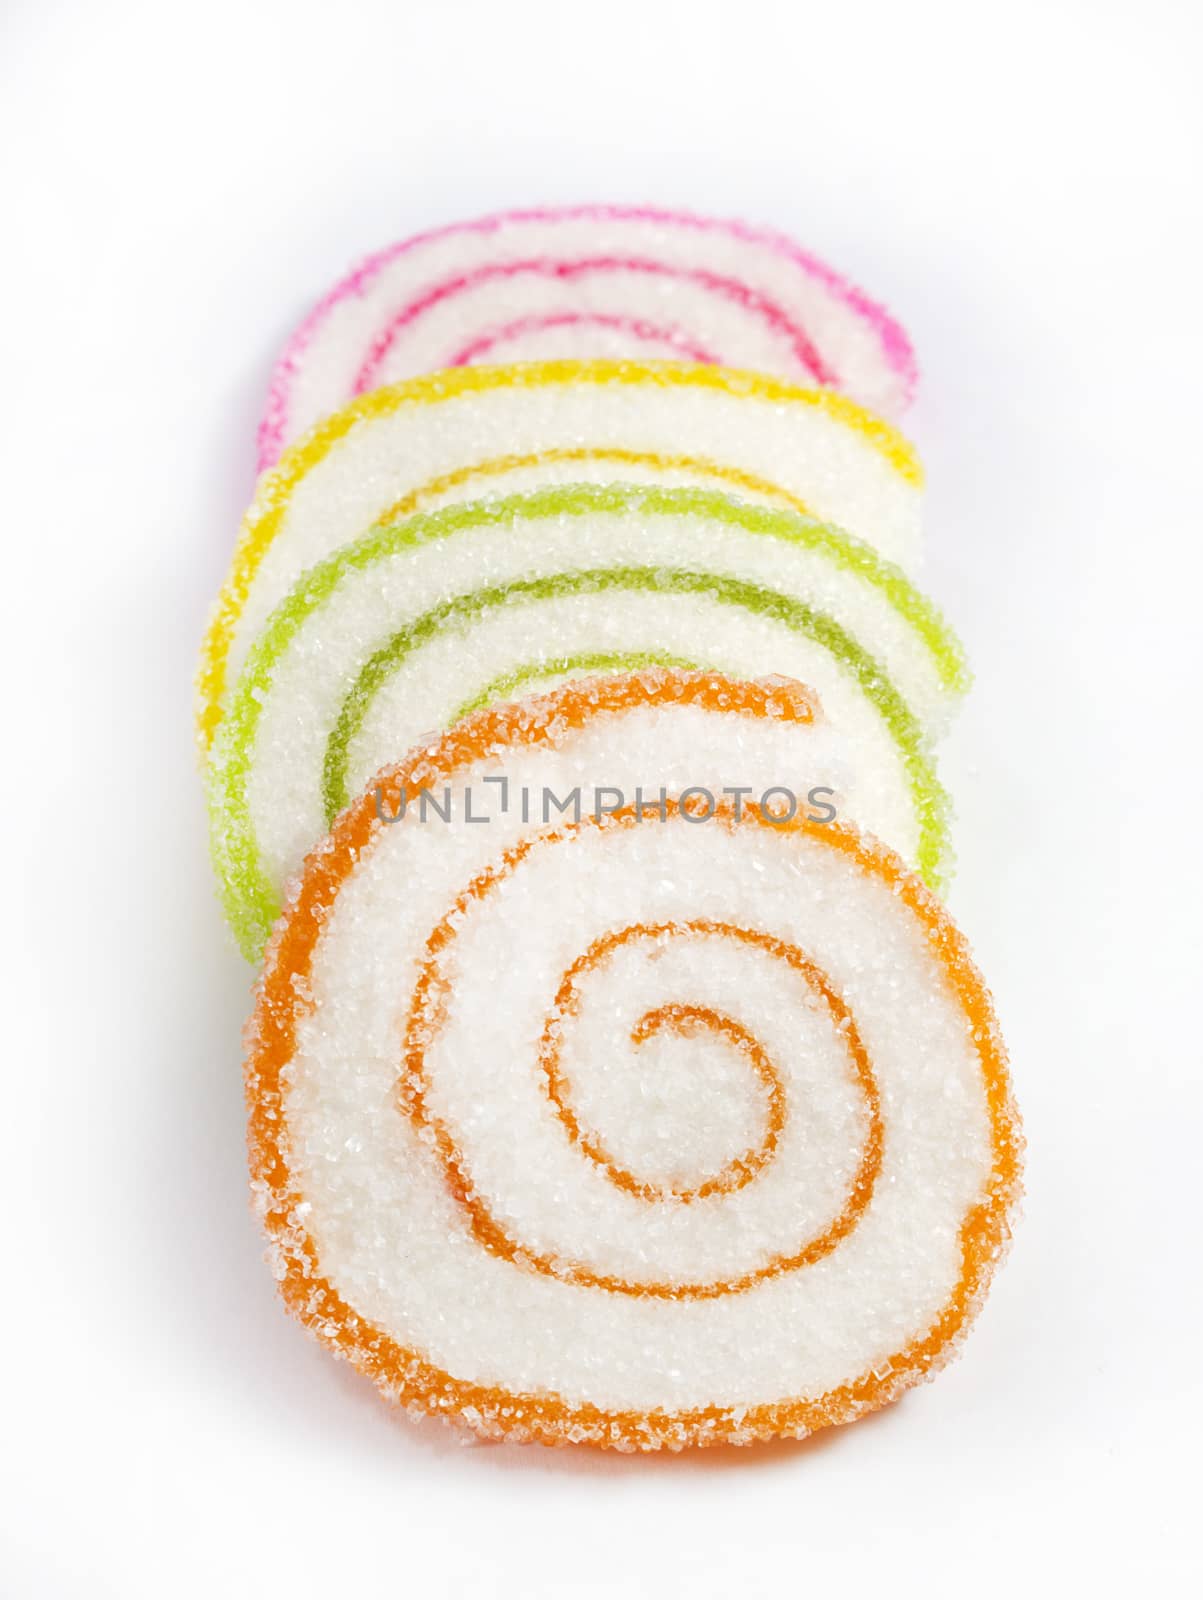 Colorful jelly candies isolated on white background.